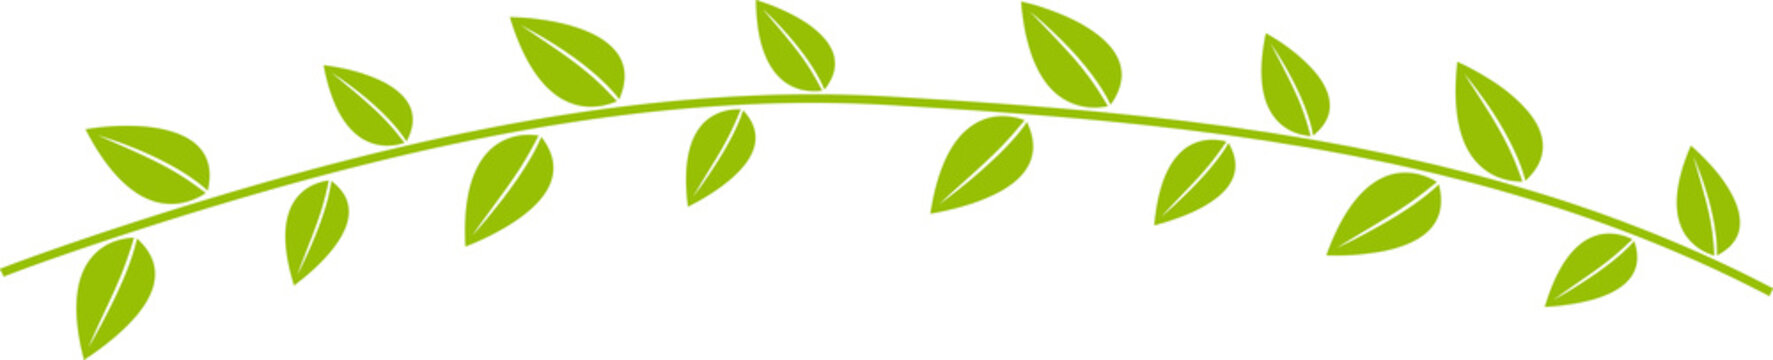 The leaf png image for eco or bio concept